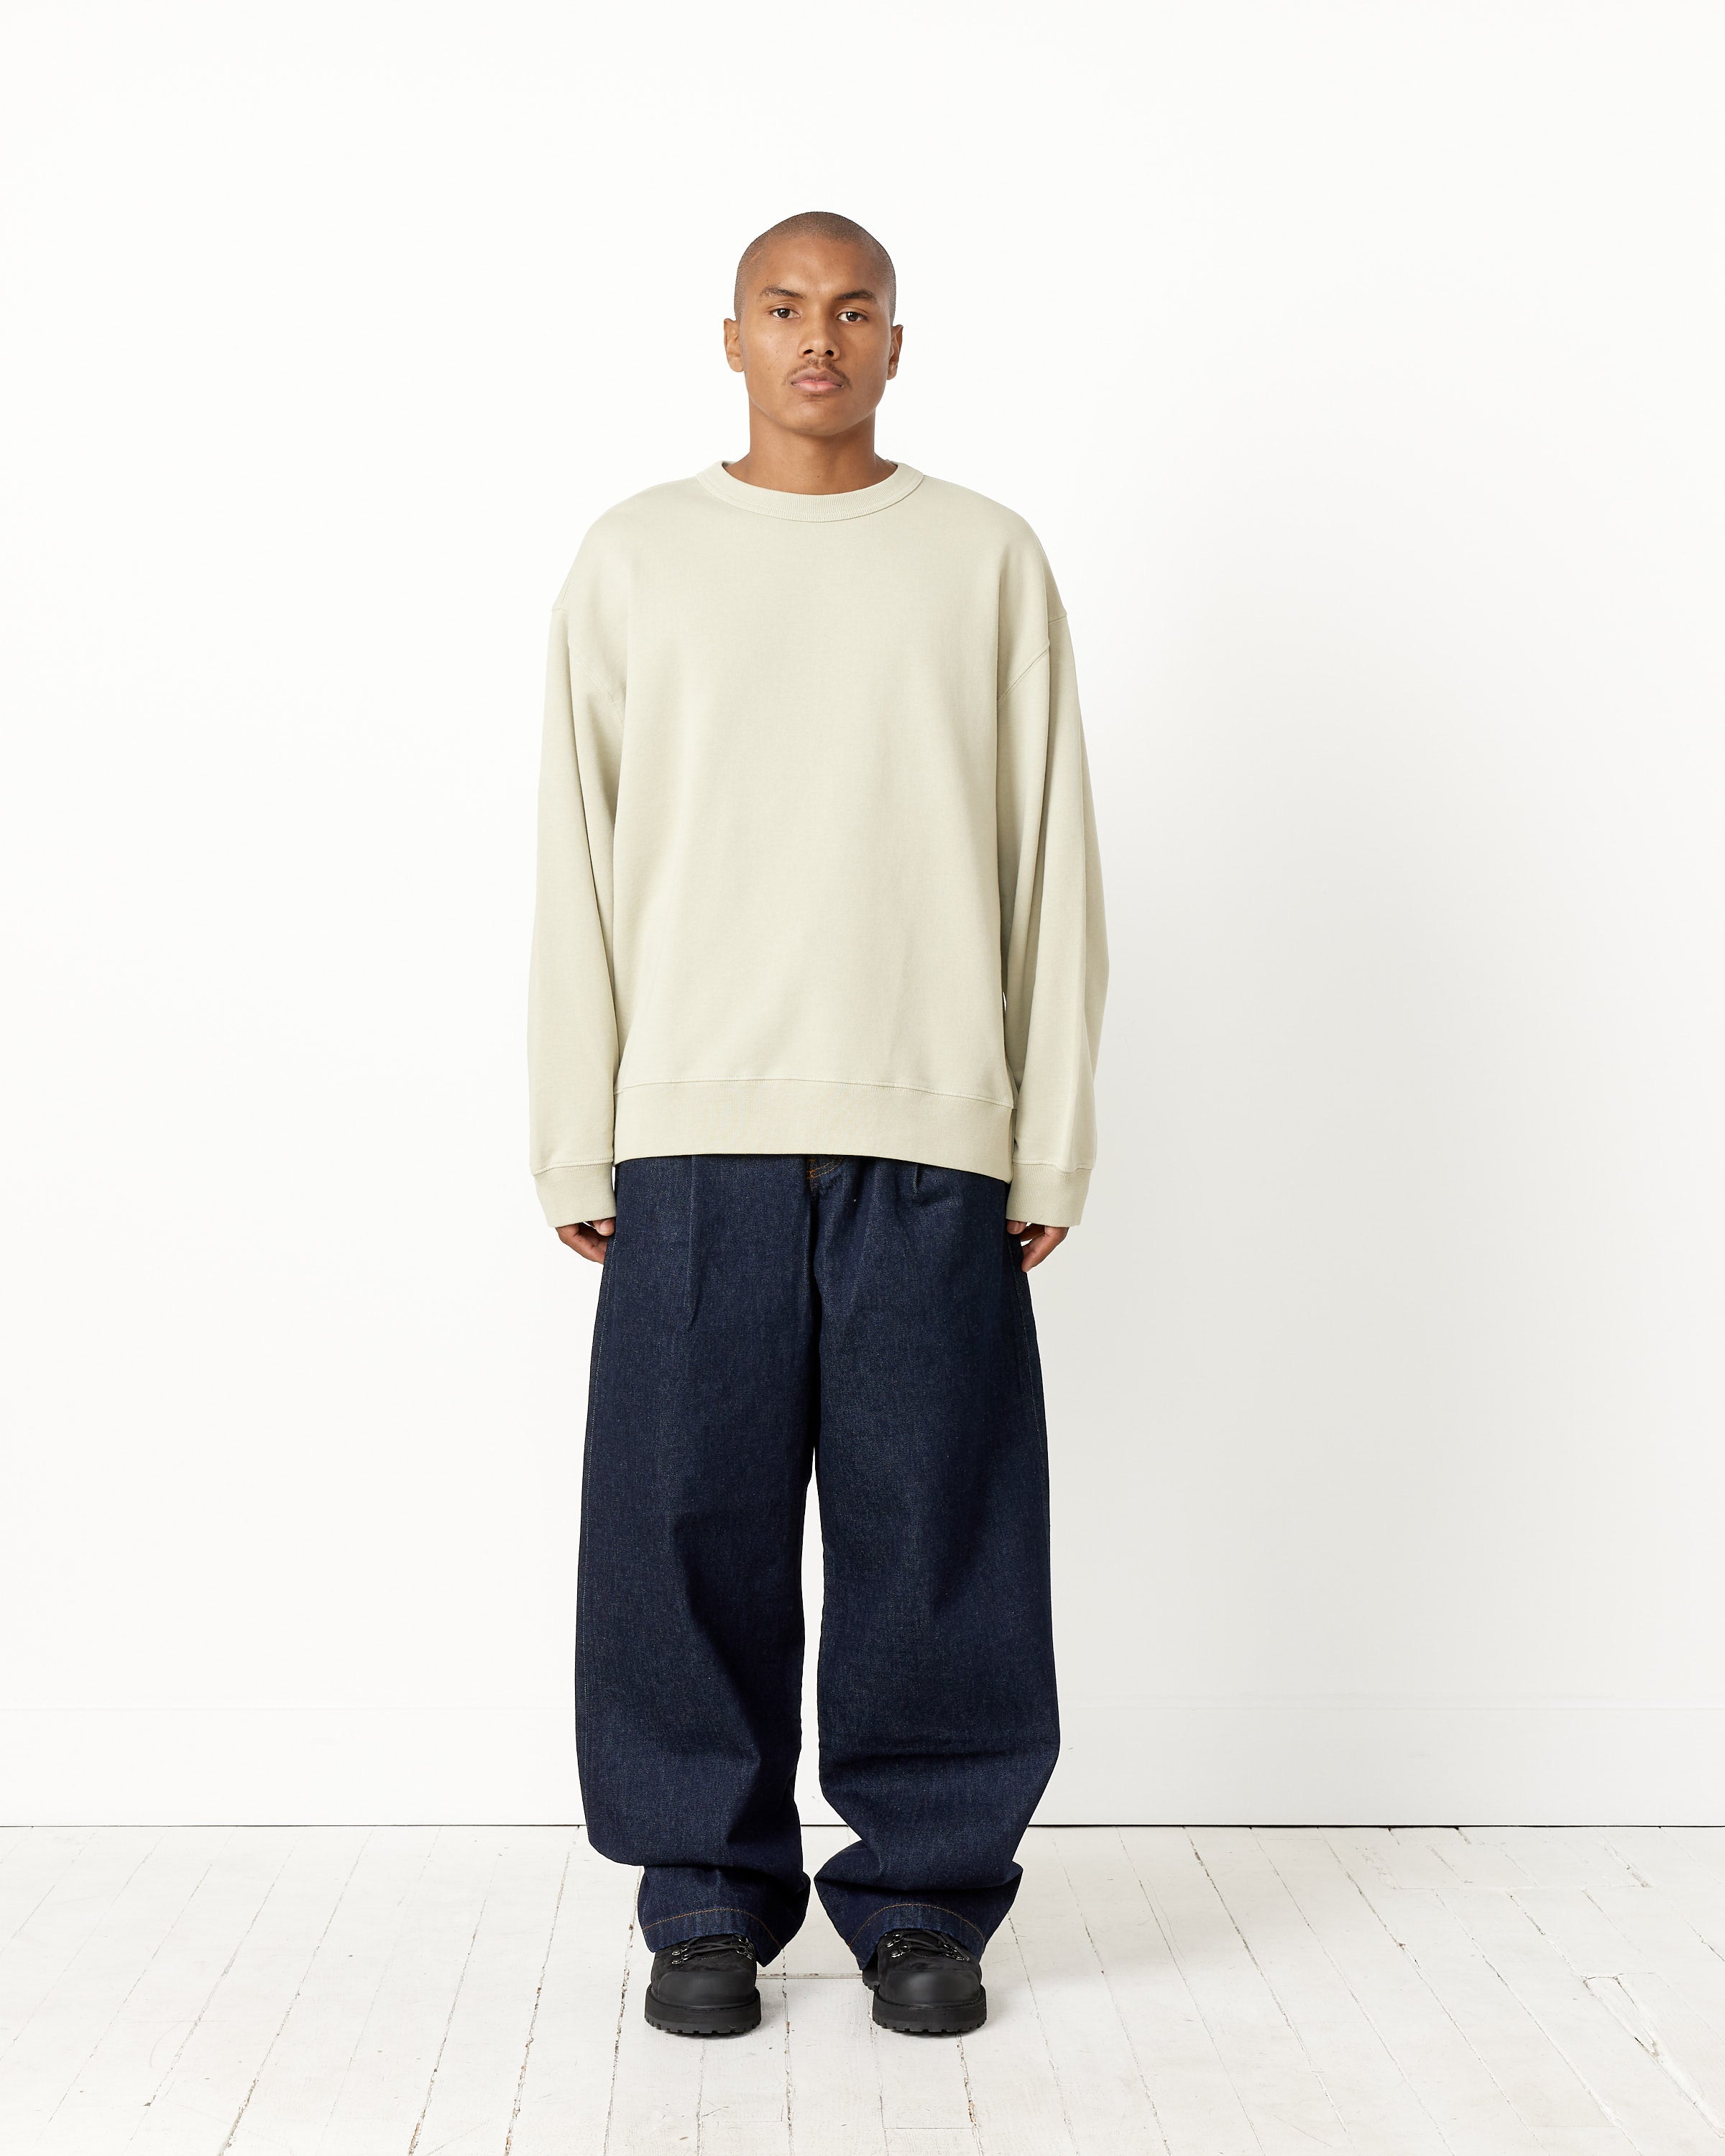 Poly Smooth Track Crew Neck – Mohawk General Store